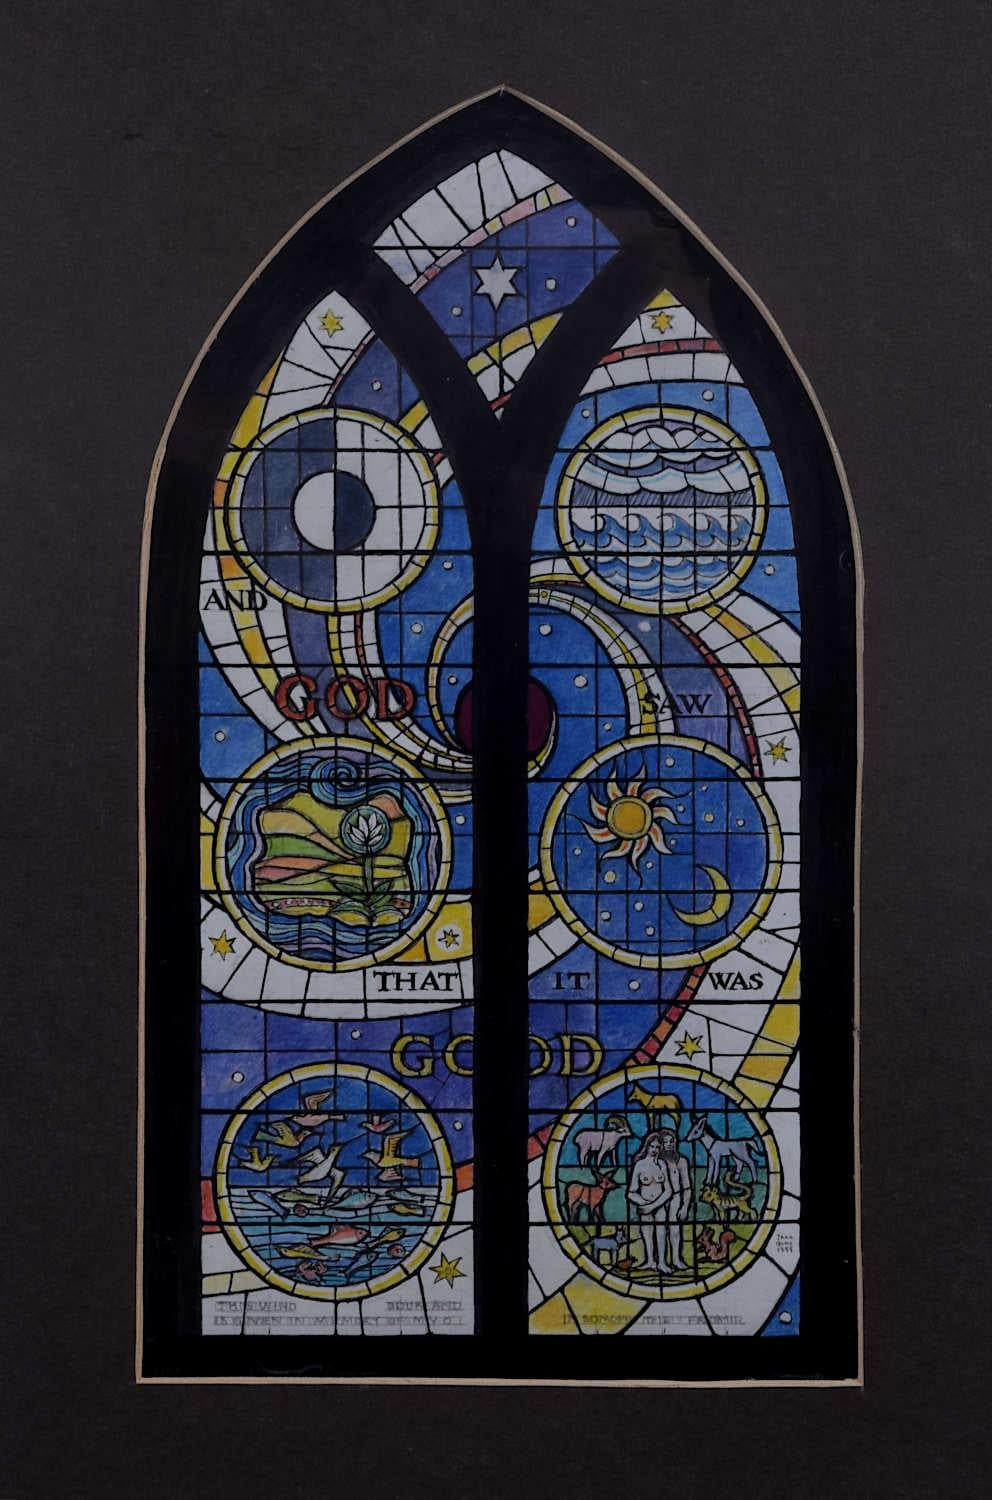 We acquired a series of watercolour stained glass designs from Jane Gray's studio. To find more scroll down to "More from this Seller" and below it click on "See all from this seller." 

Jane Gray (b.1931)
Stained Glass Design
Watercolour
25.5 x 14